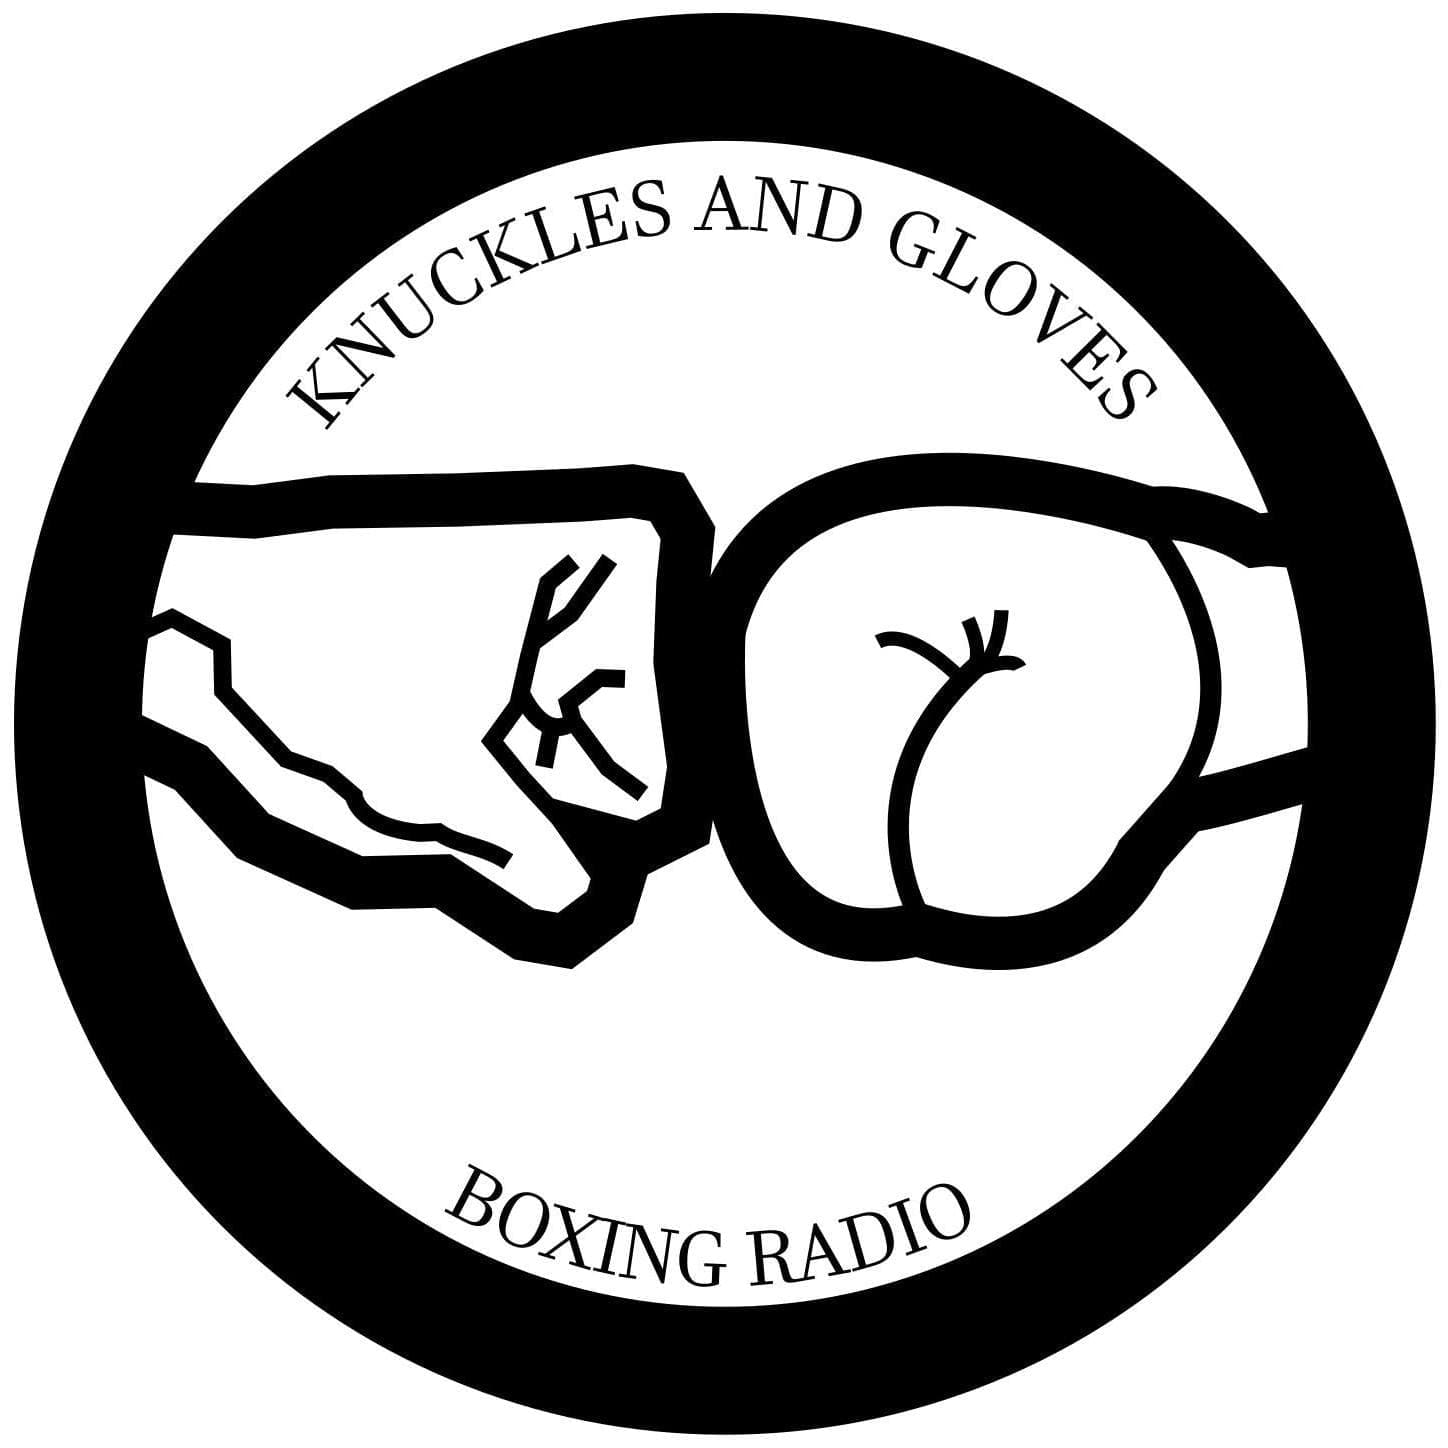 Watch Full Tvshow :Knuckles and Gloves Boxing Radio